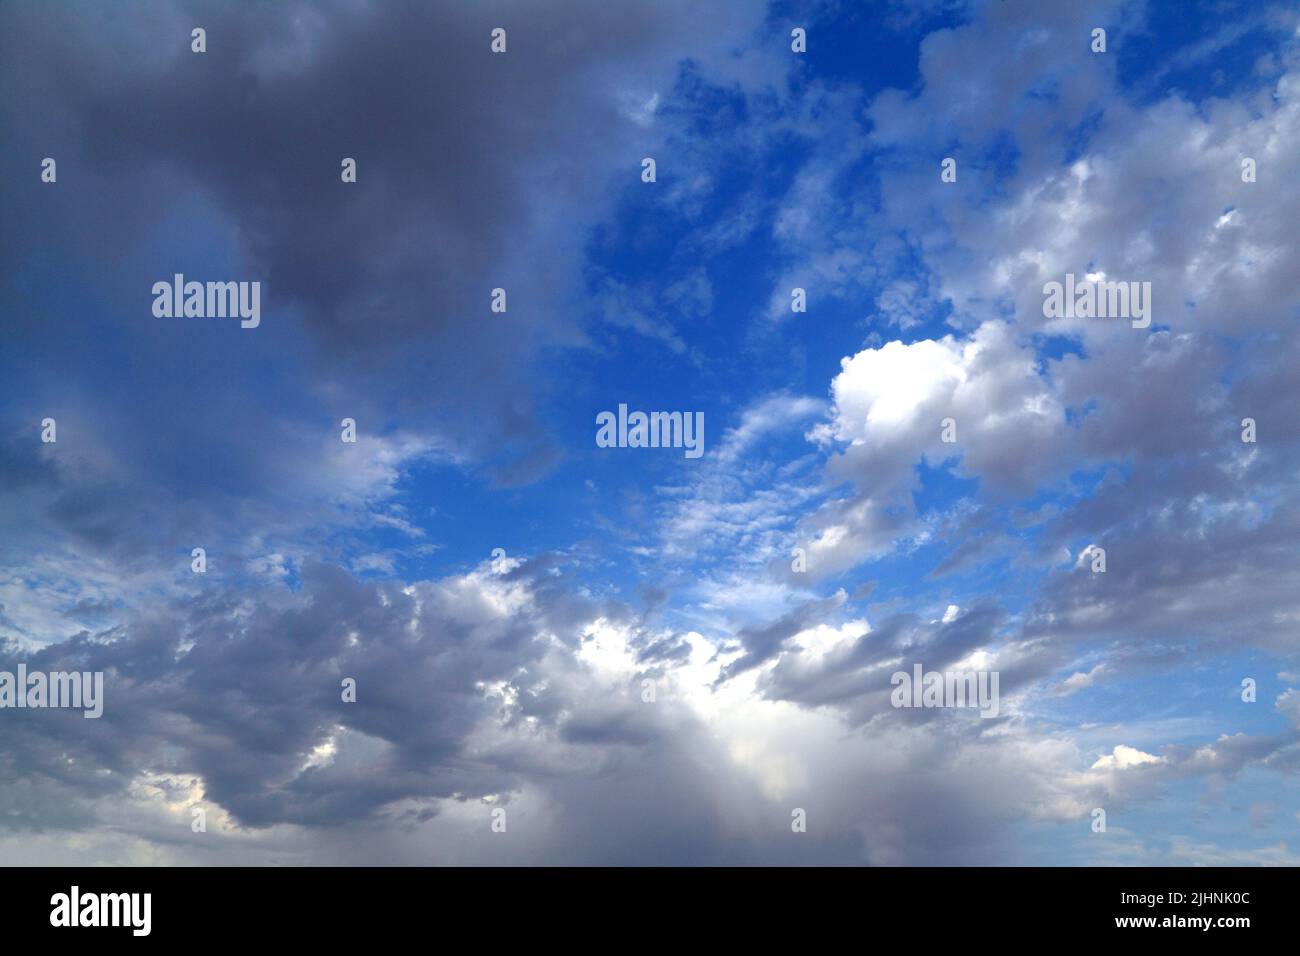 White, grey, dark clouds, formation, blue sky Stock Photo